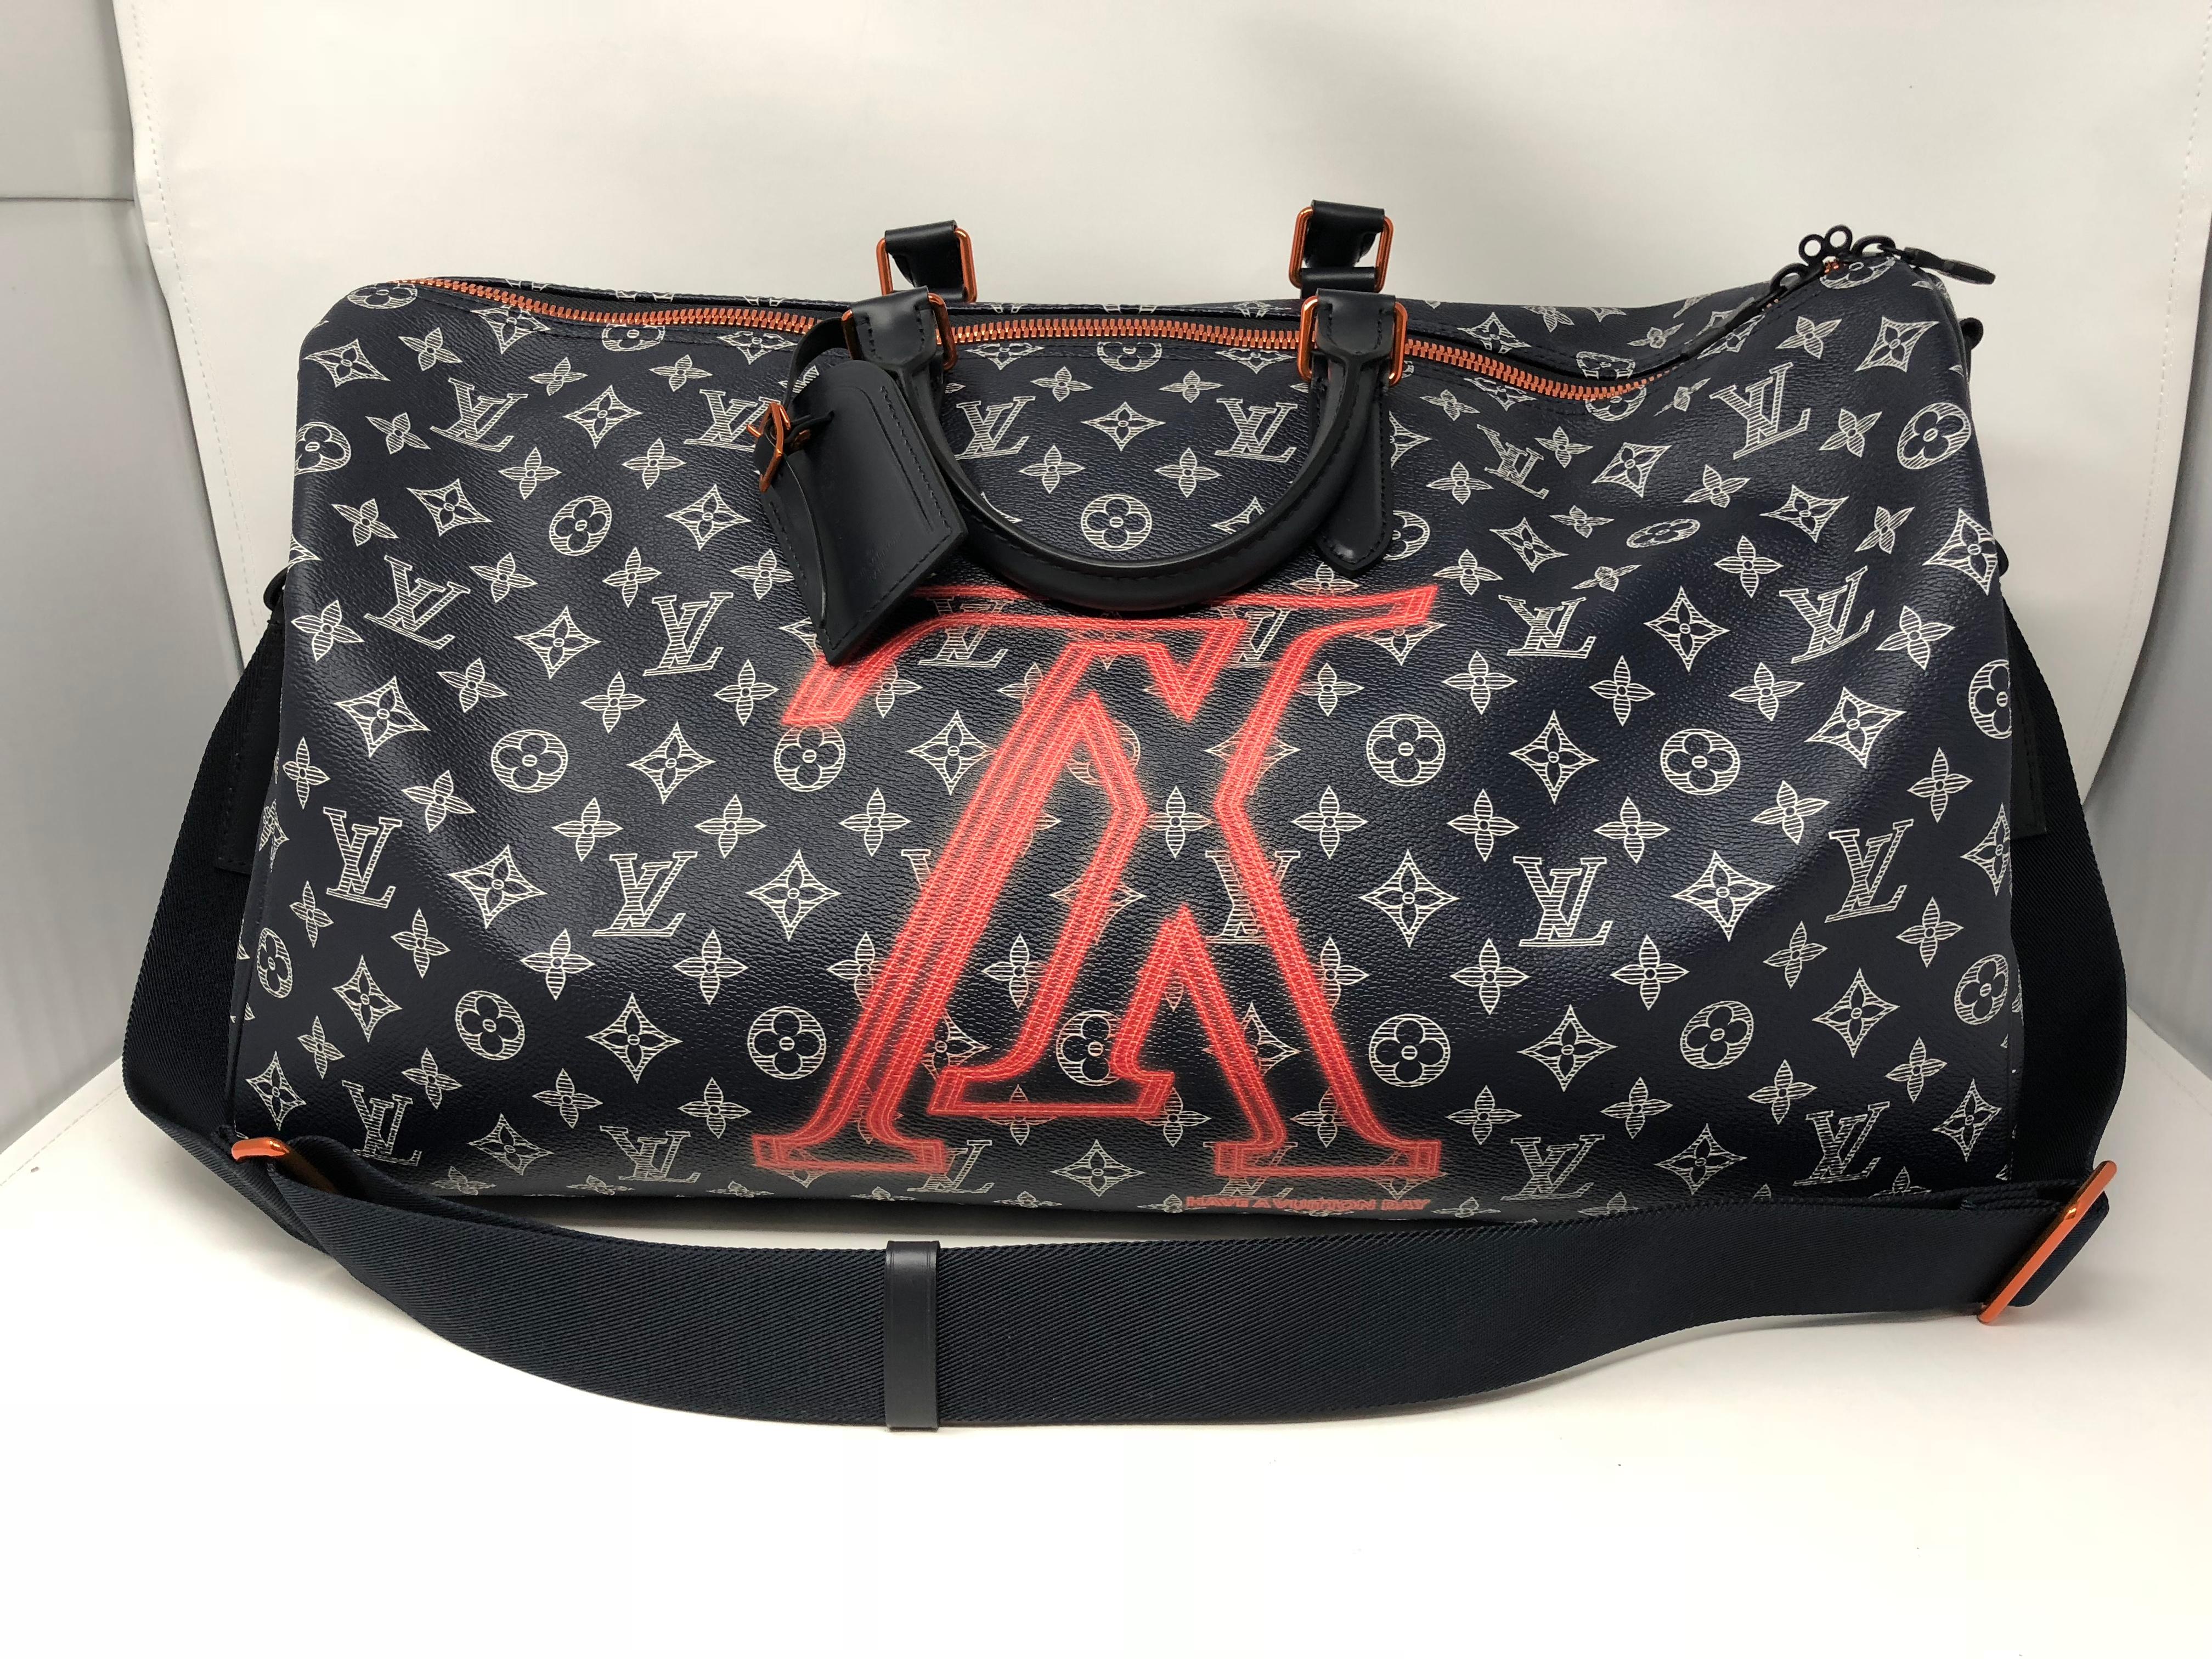 Louis Vuitton Upside Down Keepall Bandouliere 50 with strap. From Kim Jones 2018 Fall/ Winter  collection. Limited and sold out. For the true LV collector. Ink monogram with upside down logo makes this a must have for your collection. Brand new and